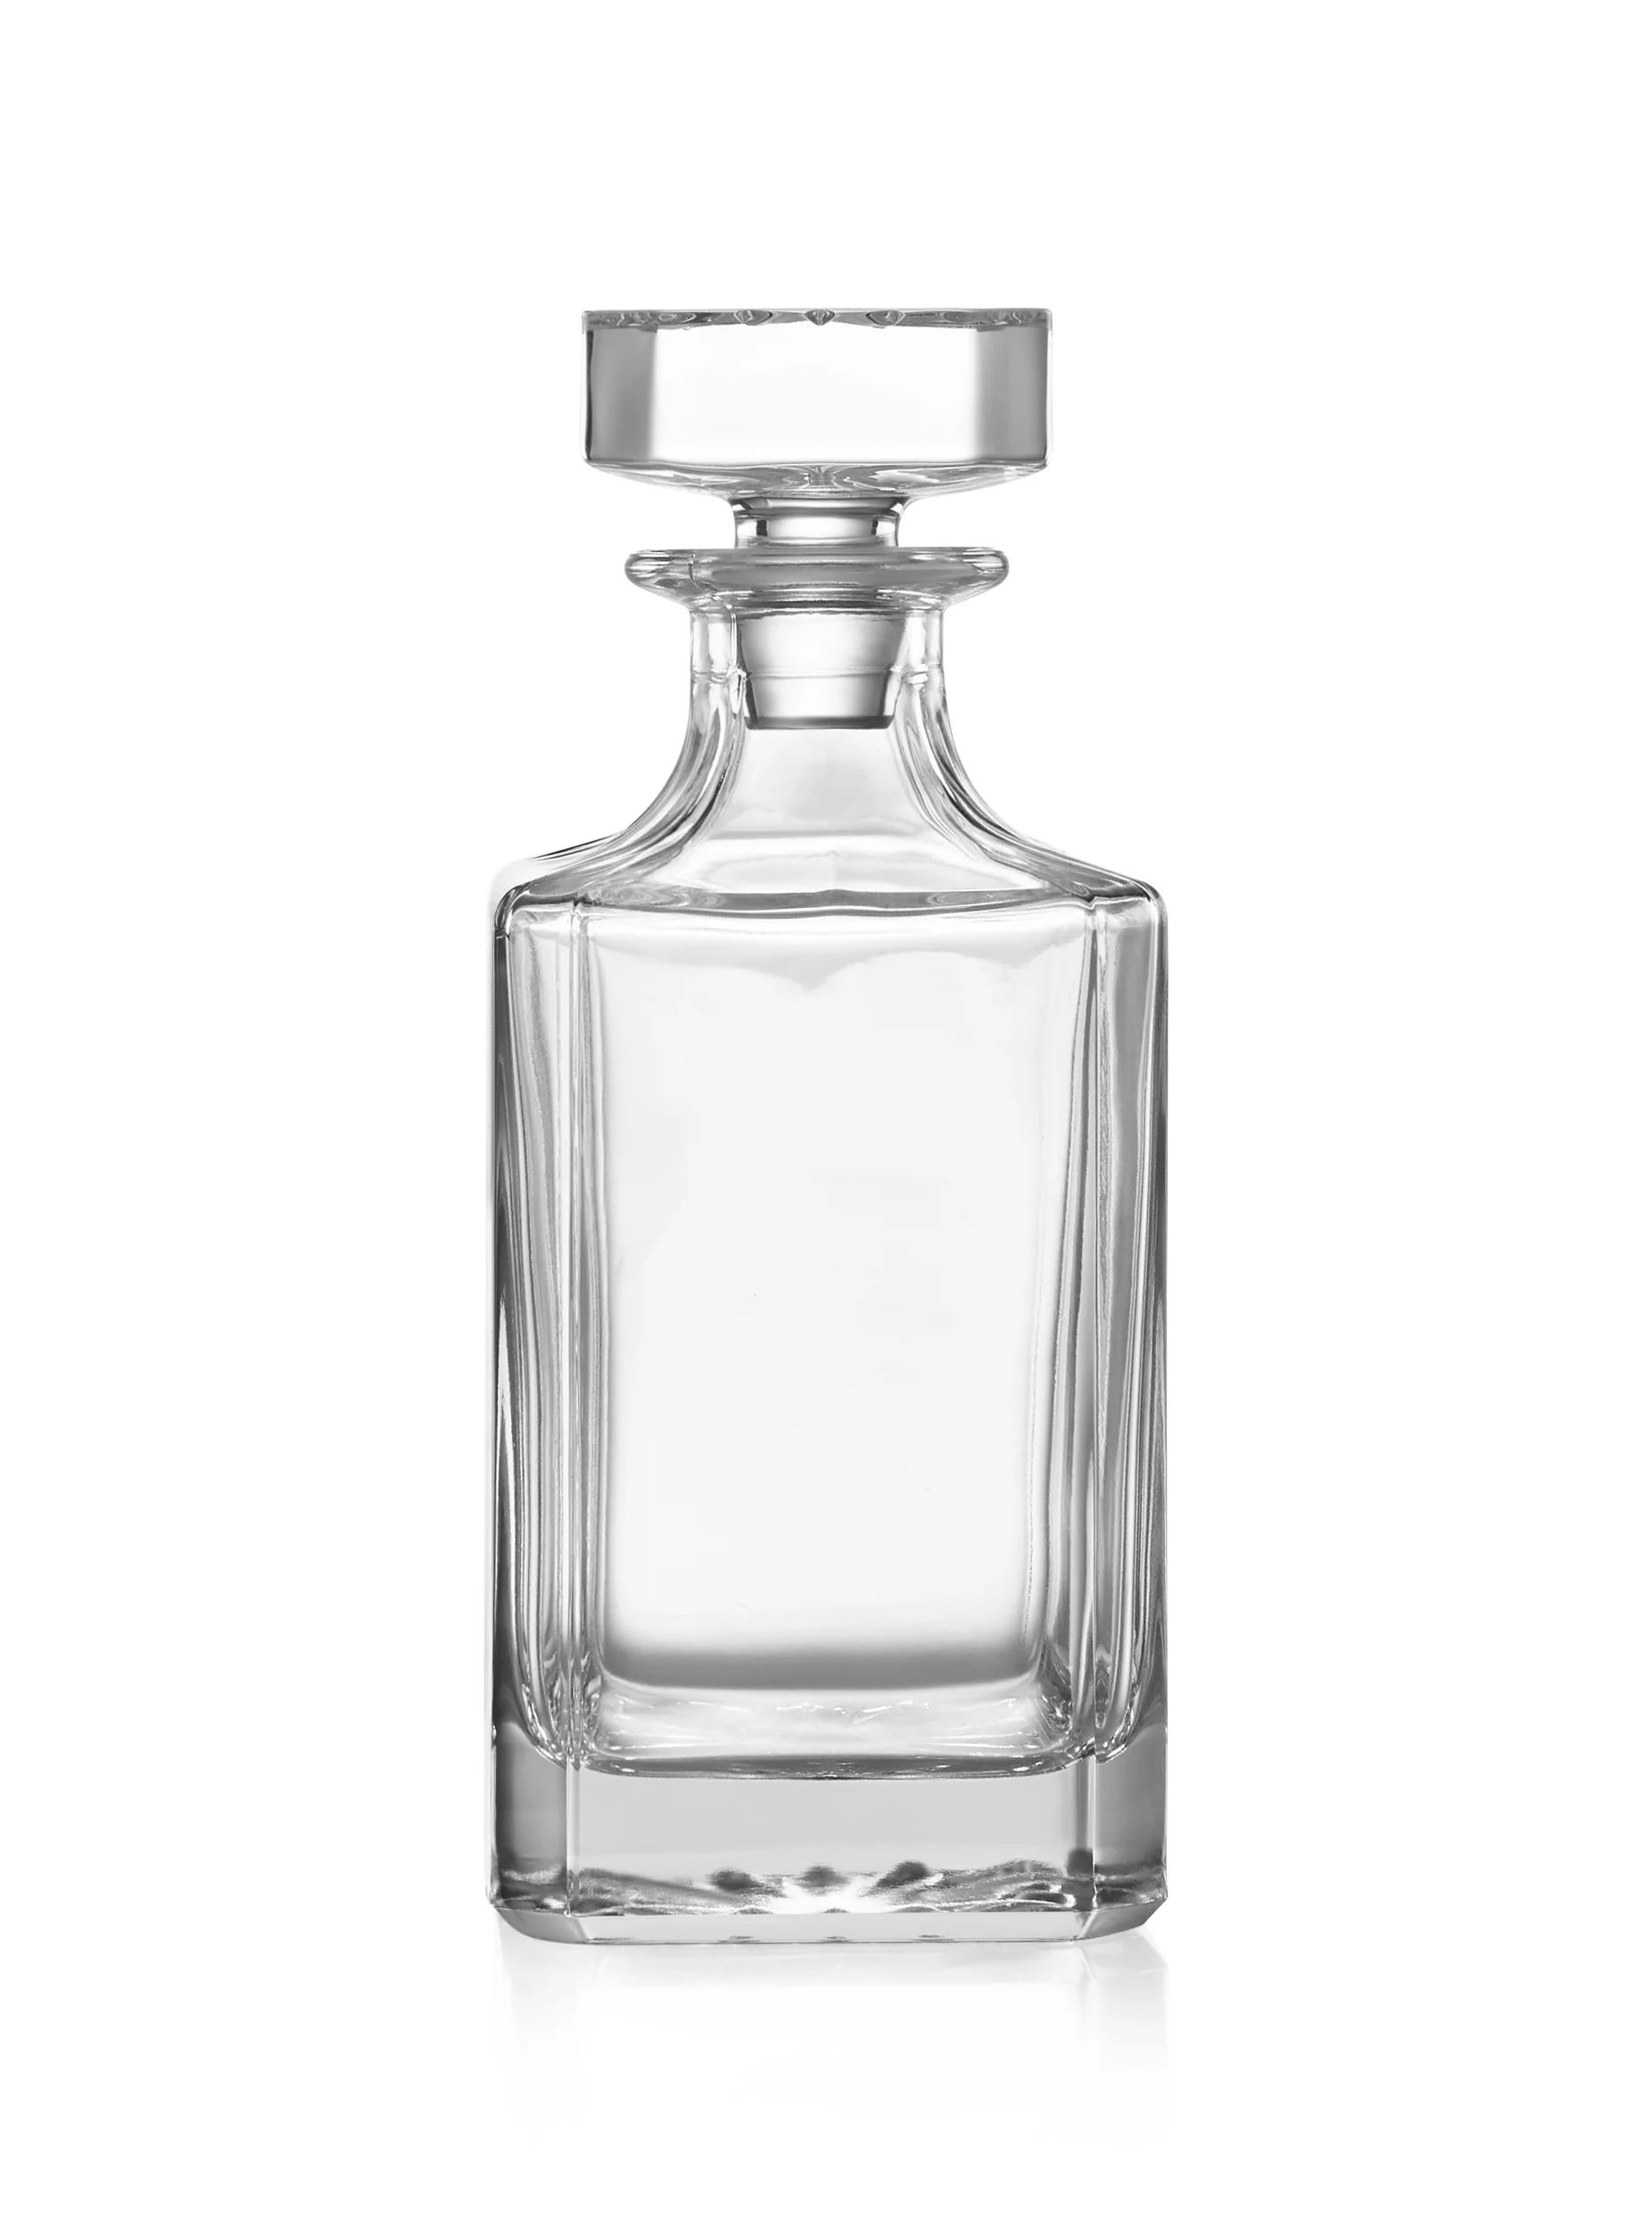 Makerflo 750 ml Glass Whiskey Decanter with Airtight Stopper, Set of 6 | Walmart (US)